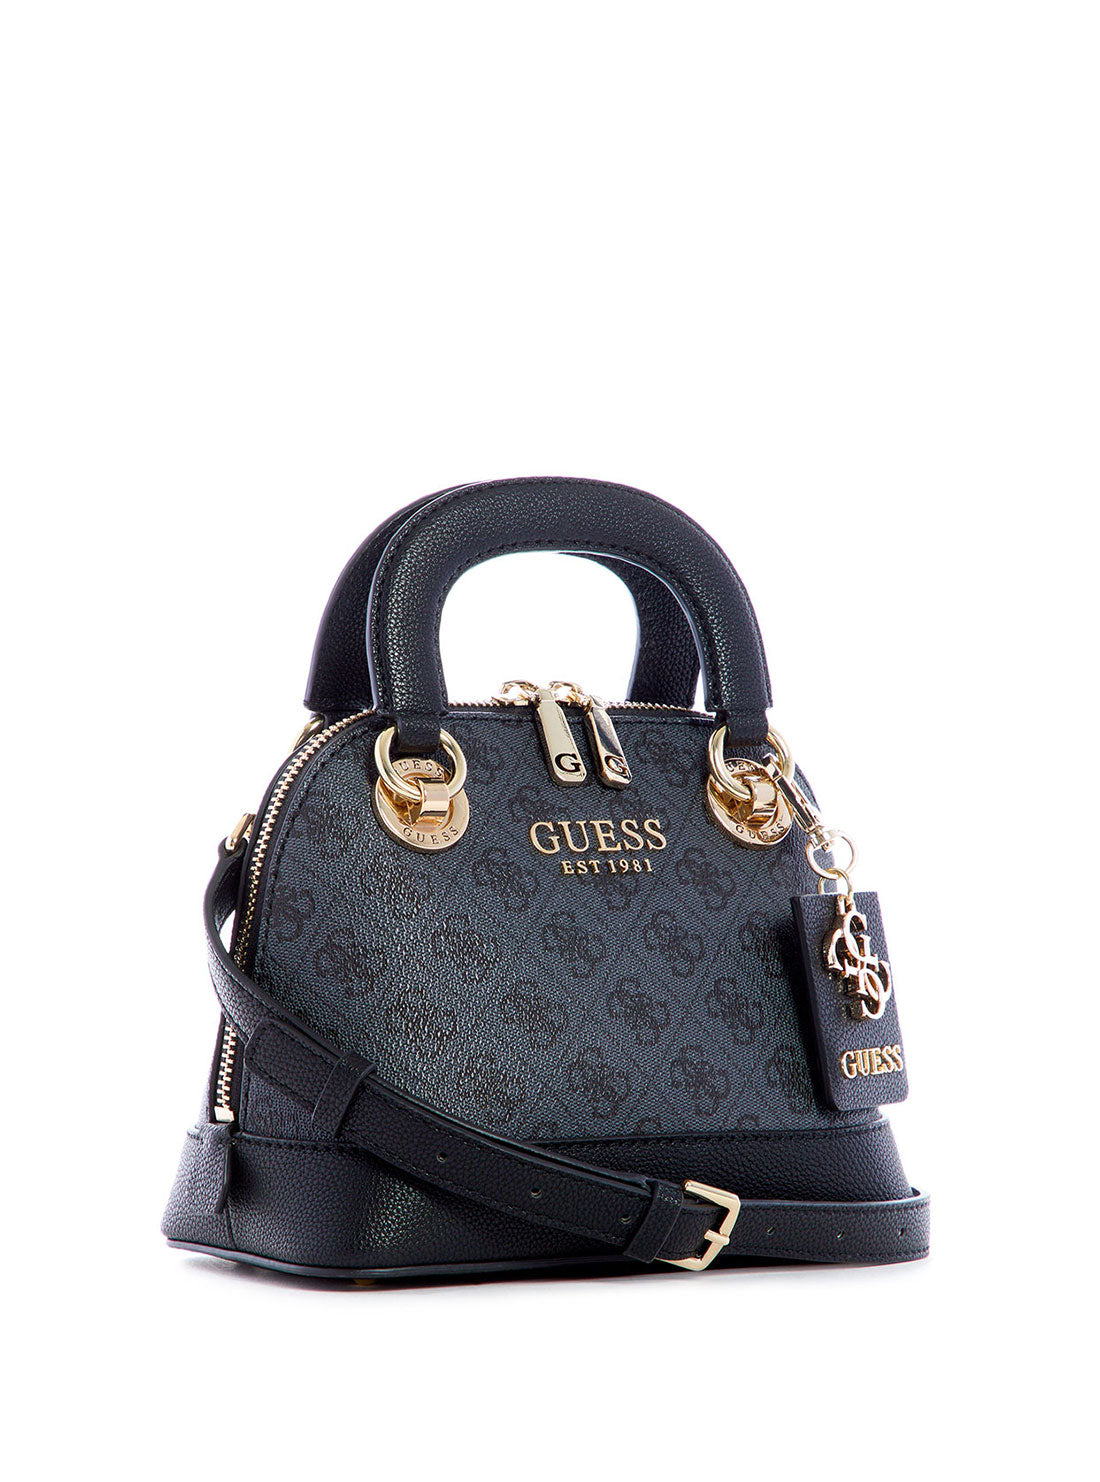 GUESS Womens Black Cathleen Small Dome Satchel SG773705 Front Side View